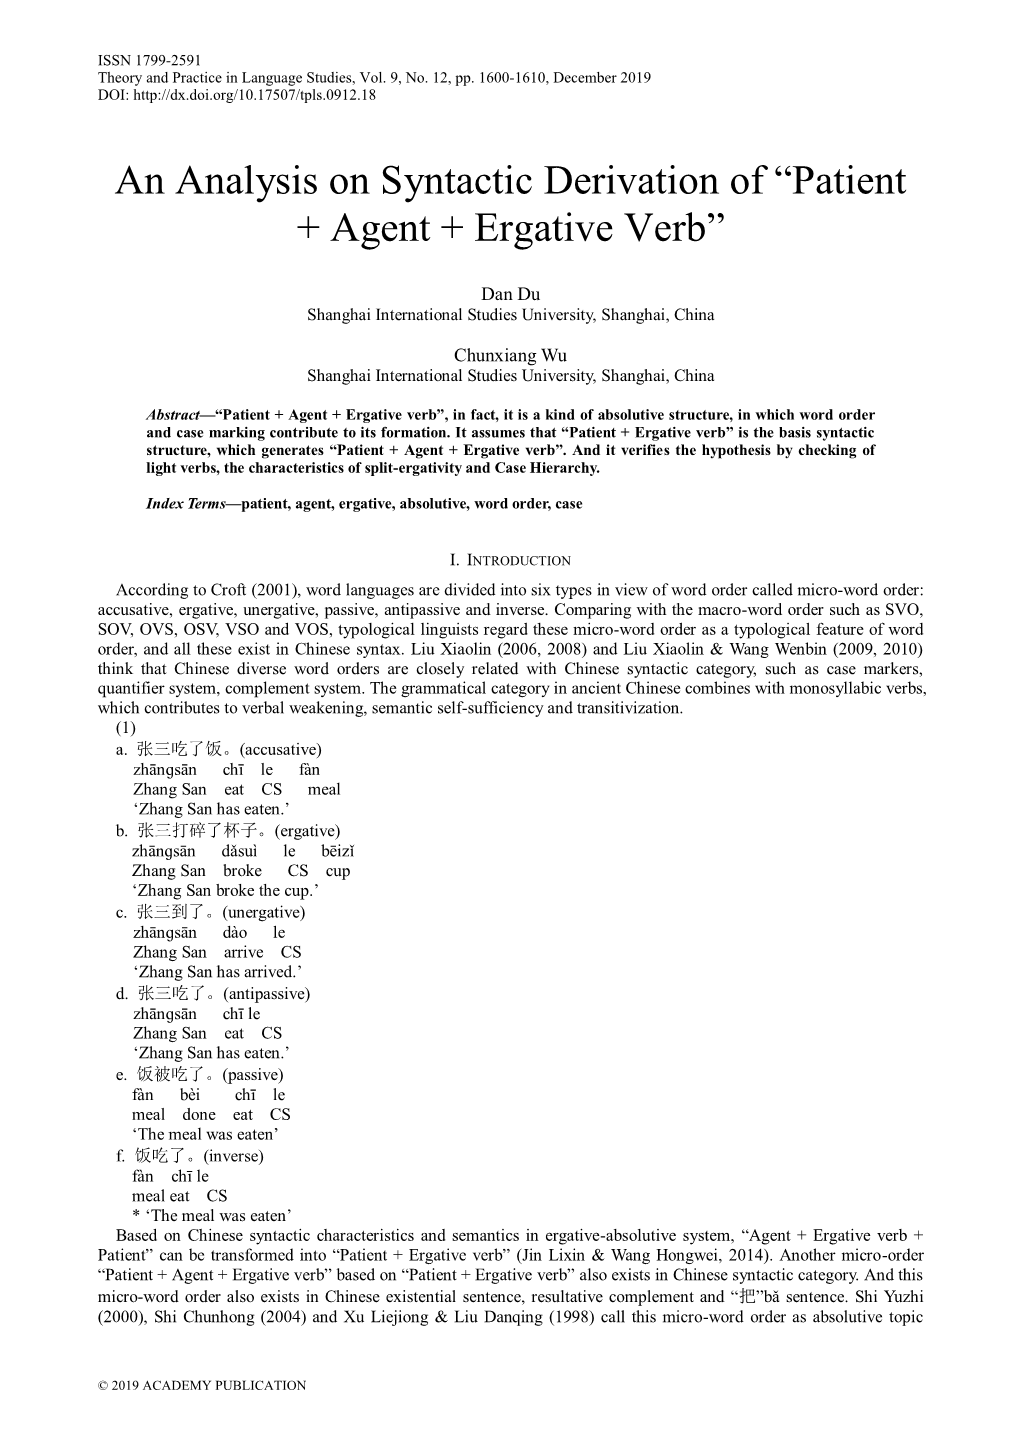 An Analysis on Syntactic Derivation of “Patient + Agent + Ergative Verb”